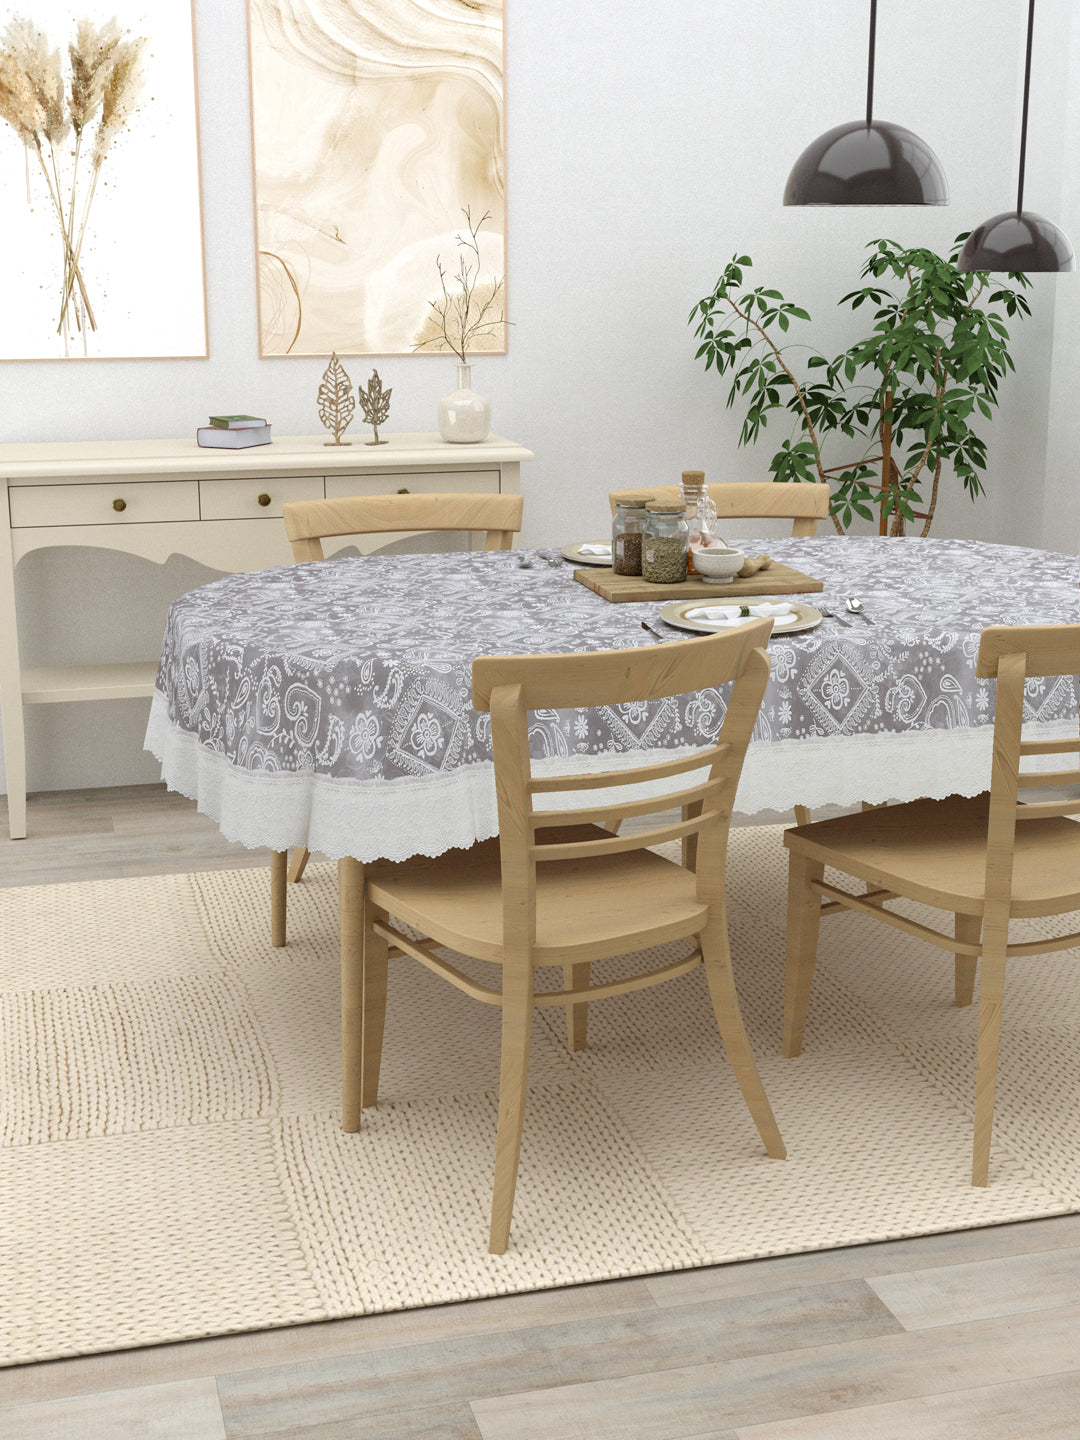 4 Seater Oval Dining Table Cover; 54x78 Inches; Material - PVC; Anti Slip; White Print On Grey